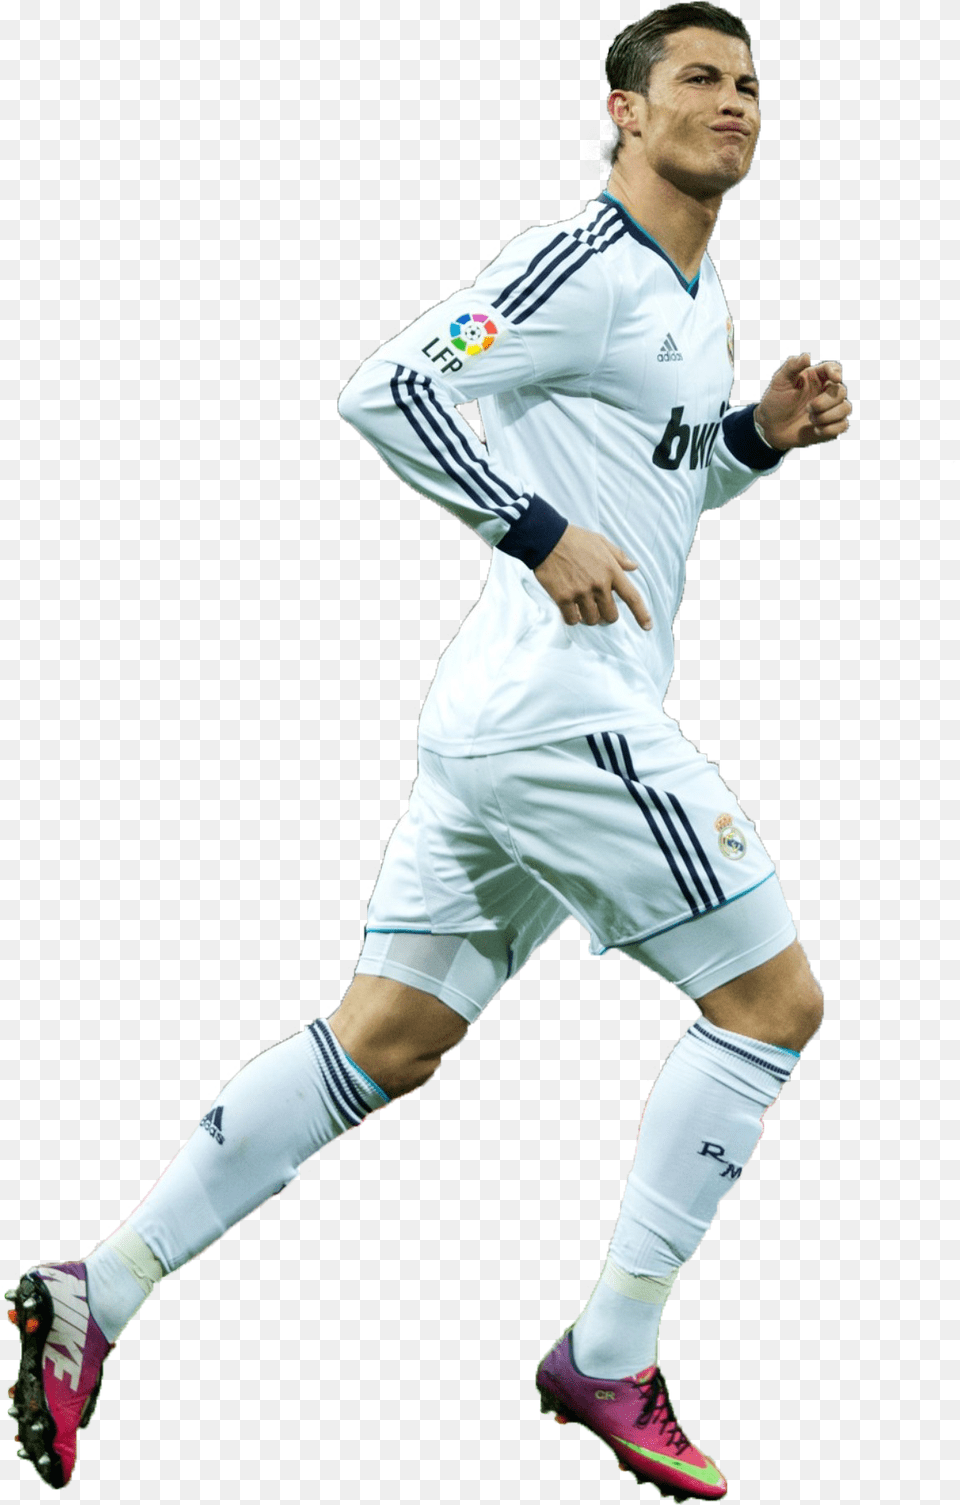 Gareth Bale Wallpaper 2018 Hd 79 Images Player, Body Part, Clothing, Shorts, Finger Free Transparent Png